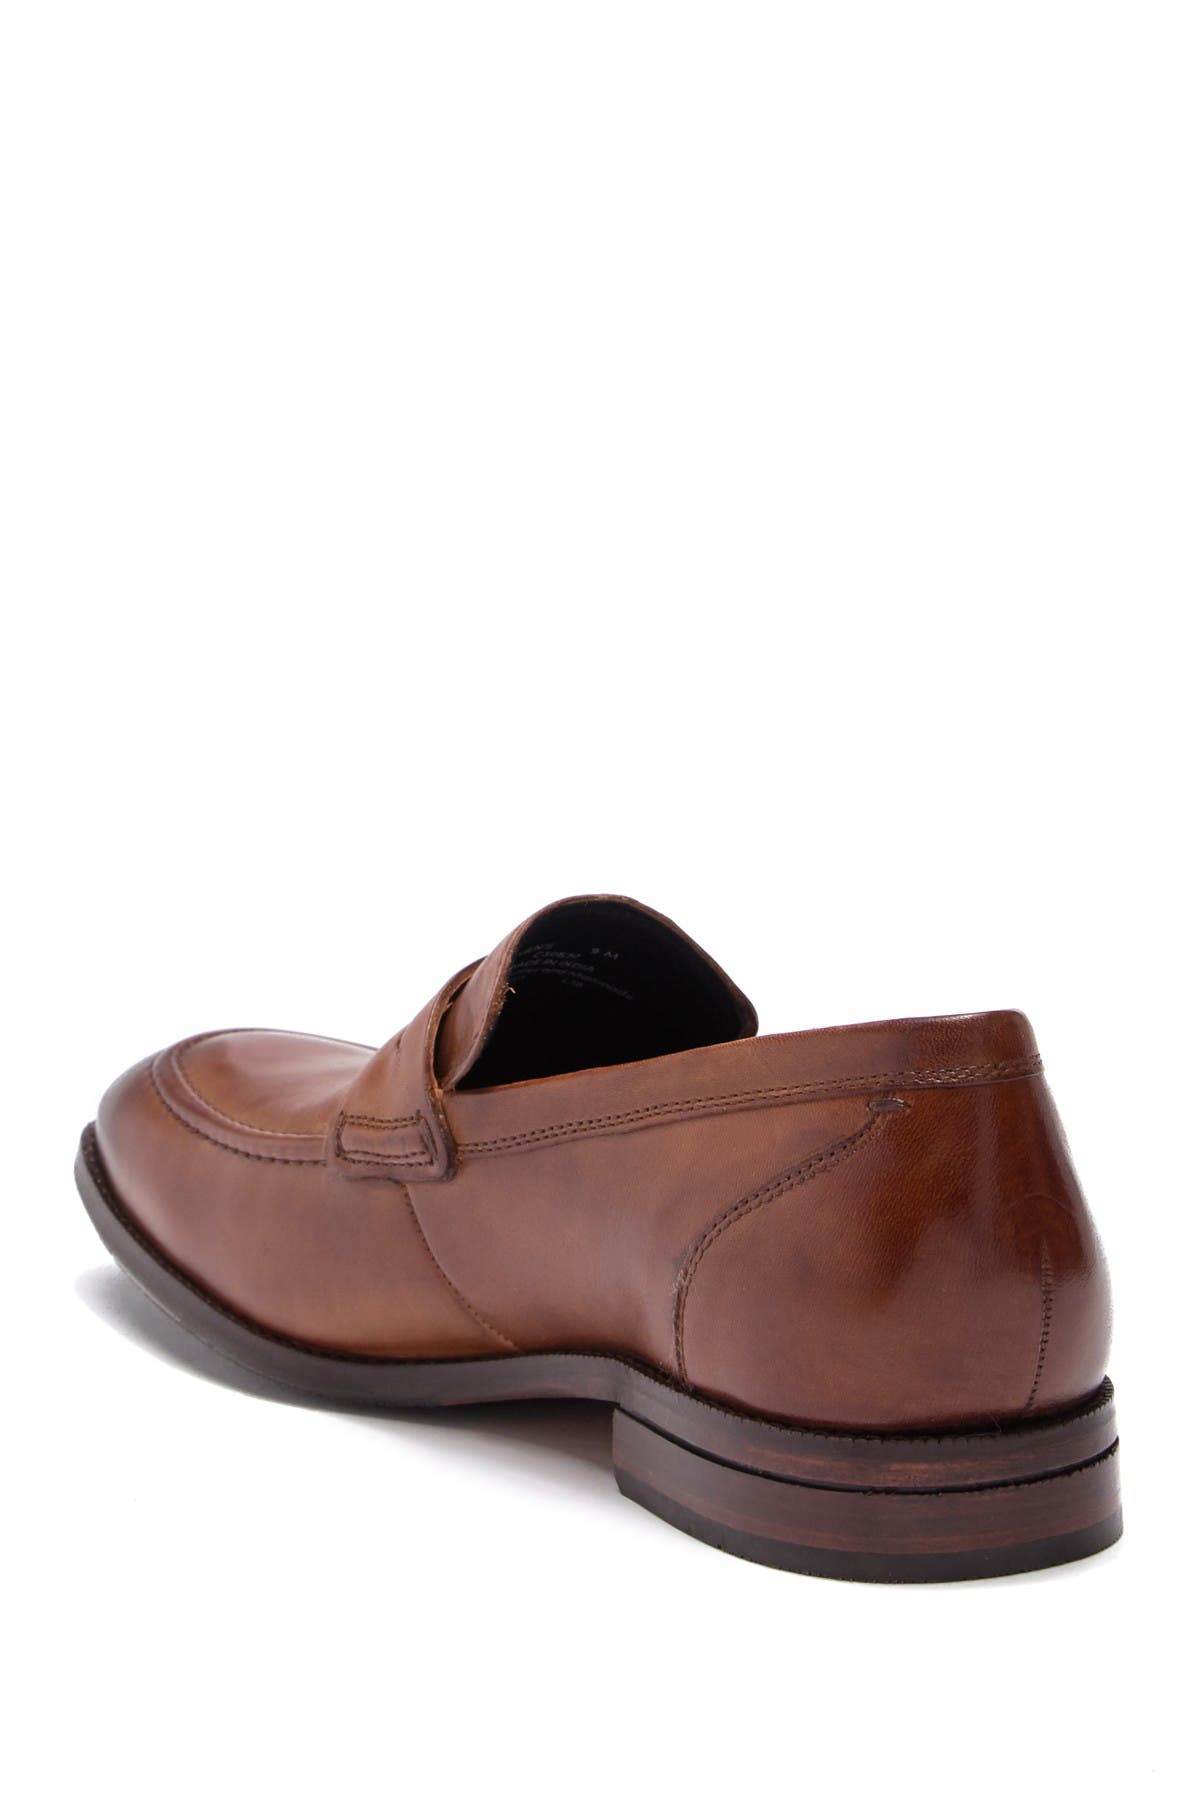 cole haan fleming leather penny loafer